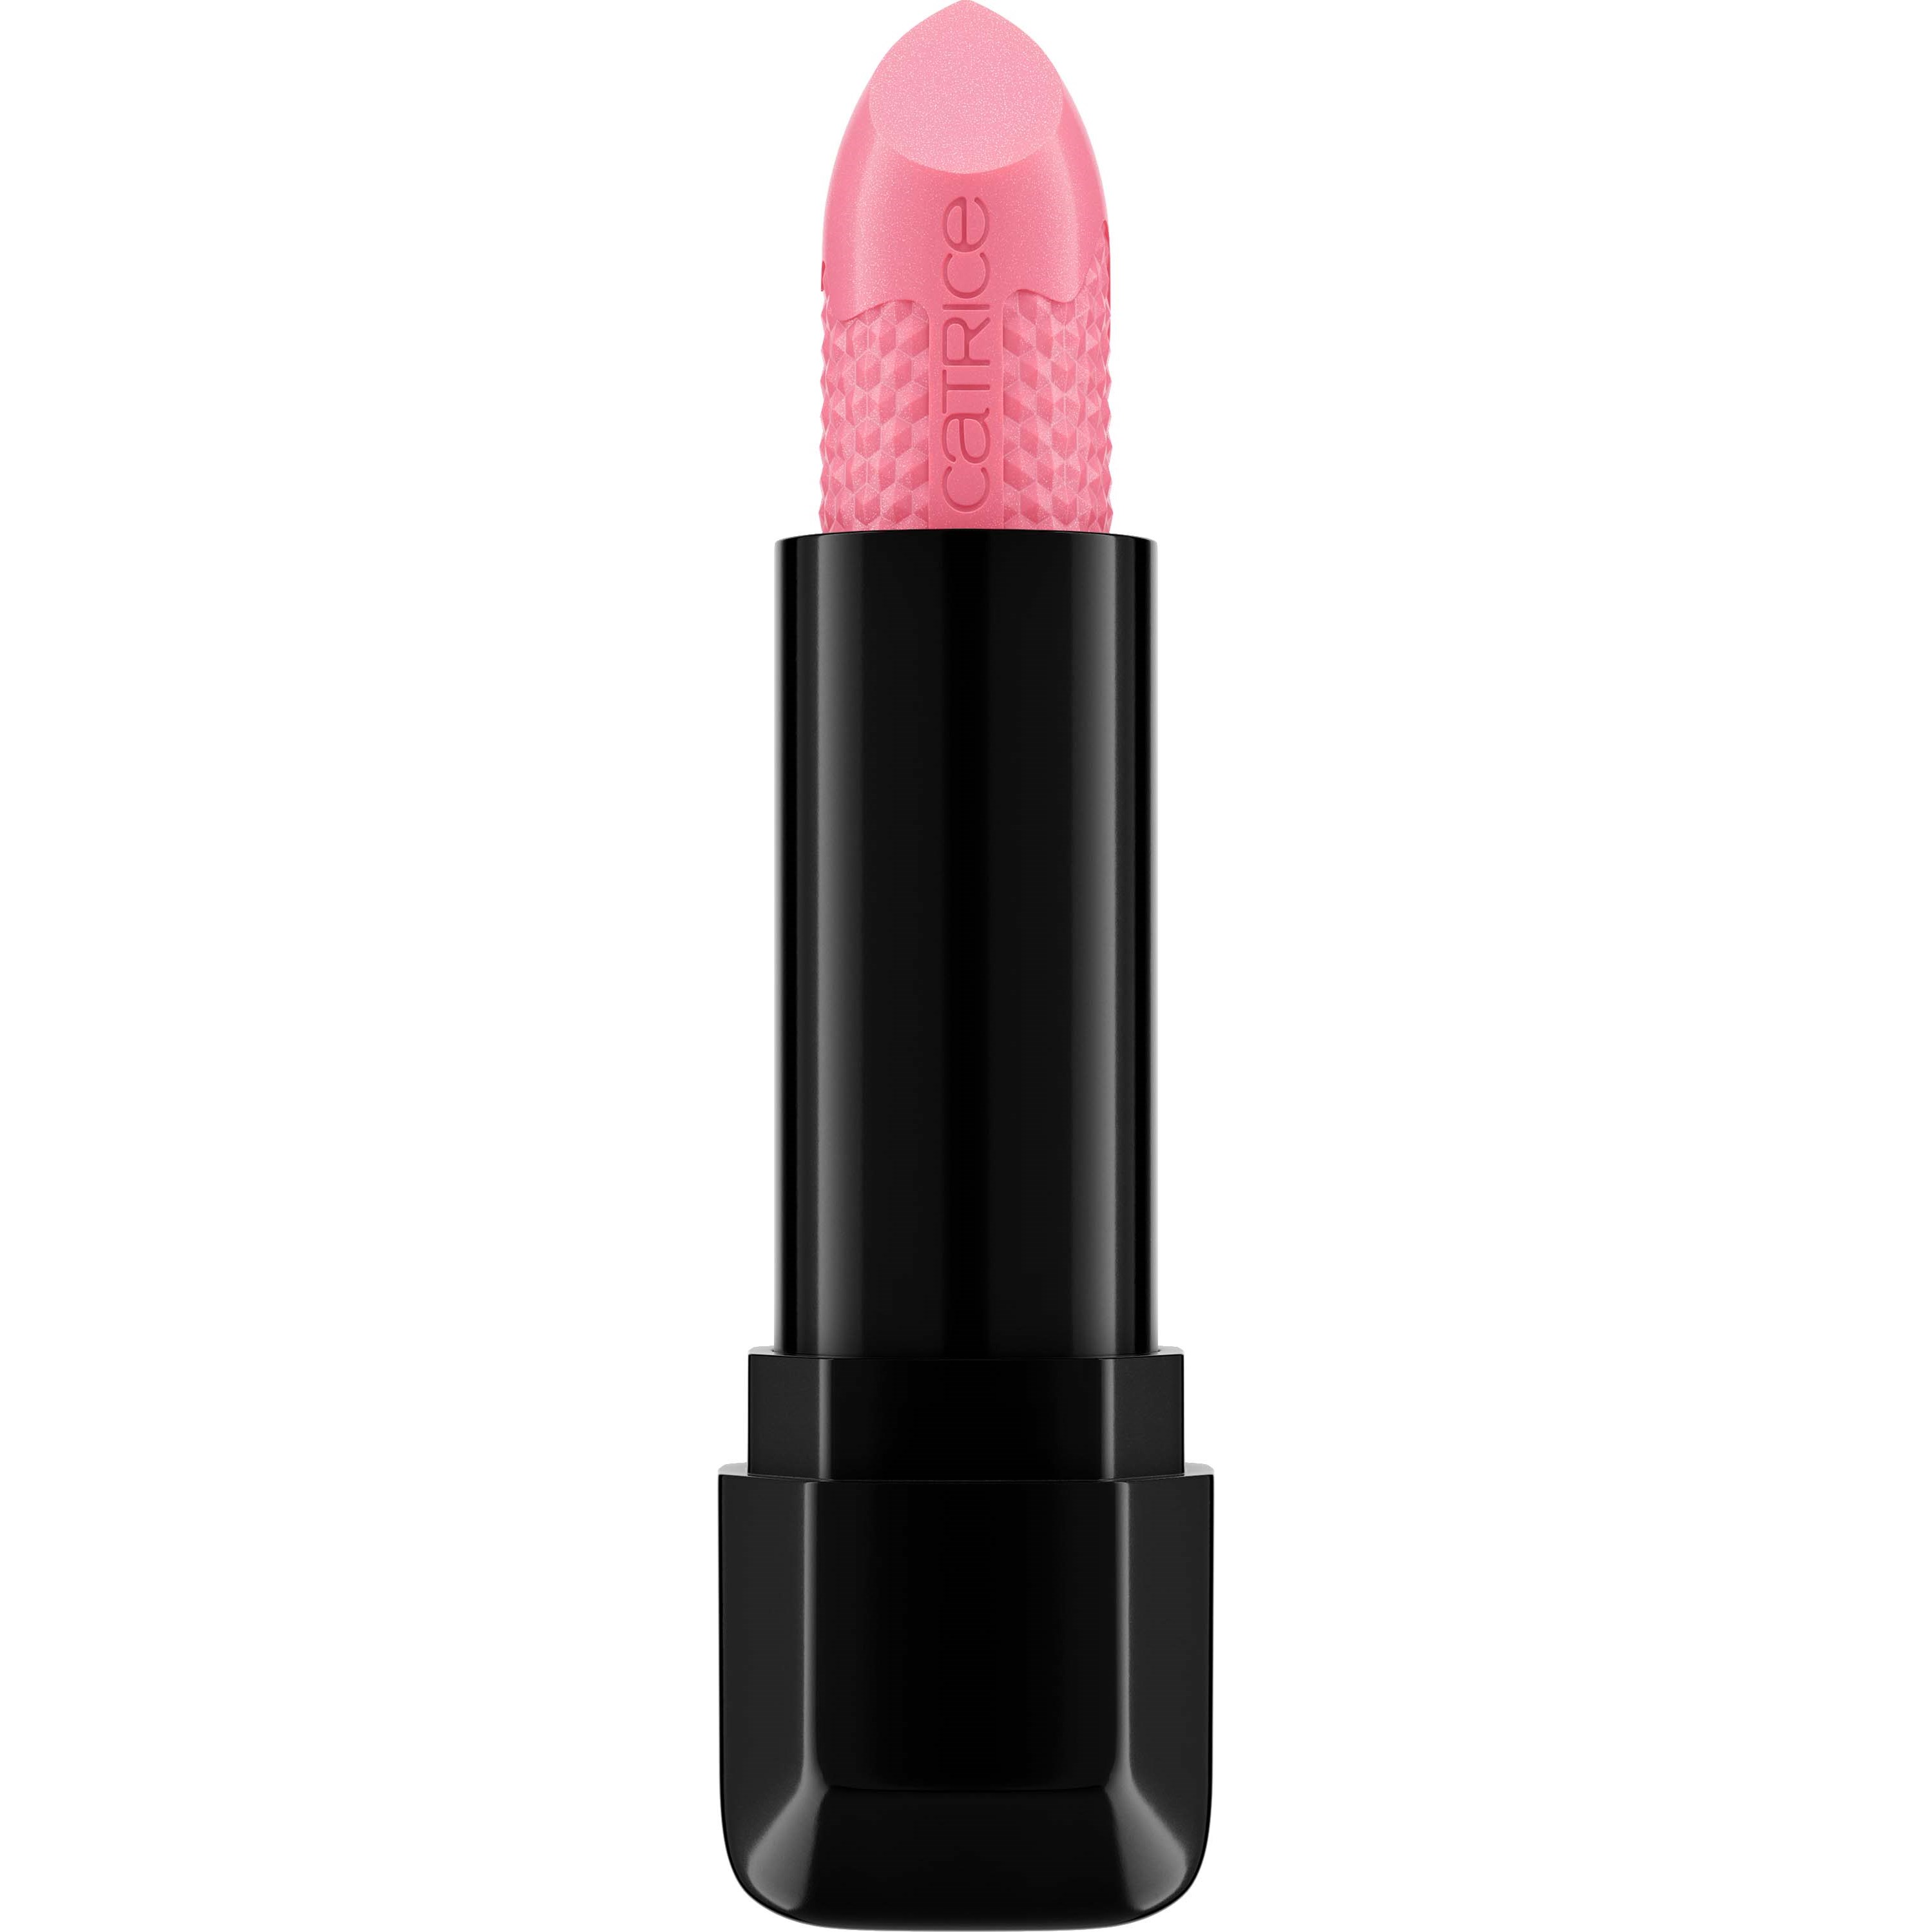 Catrice Autumn Collection Shine Bomb Lipstick 110 Pink Baby Pink